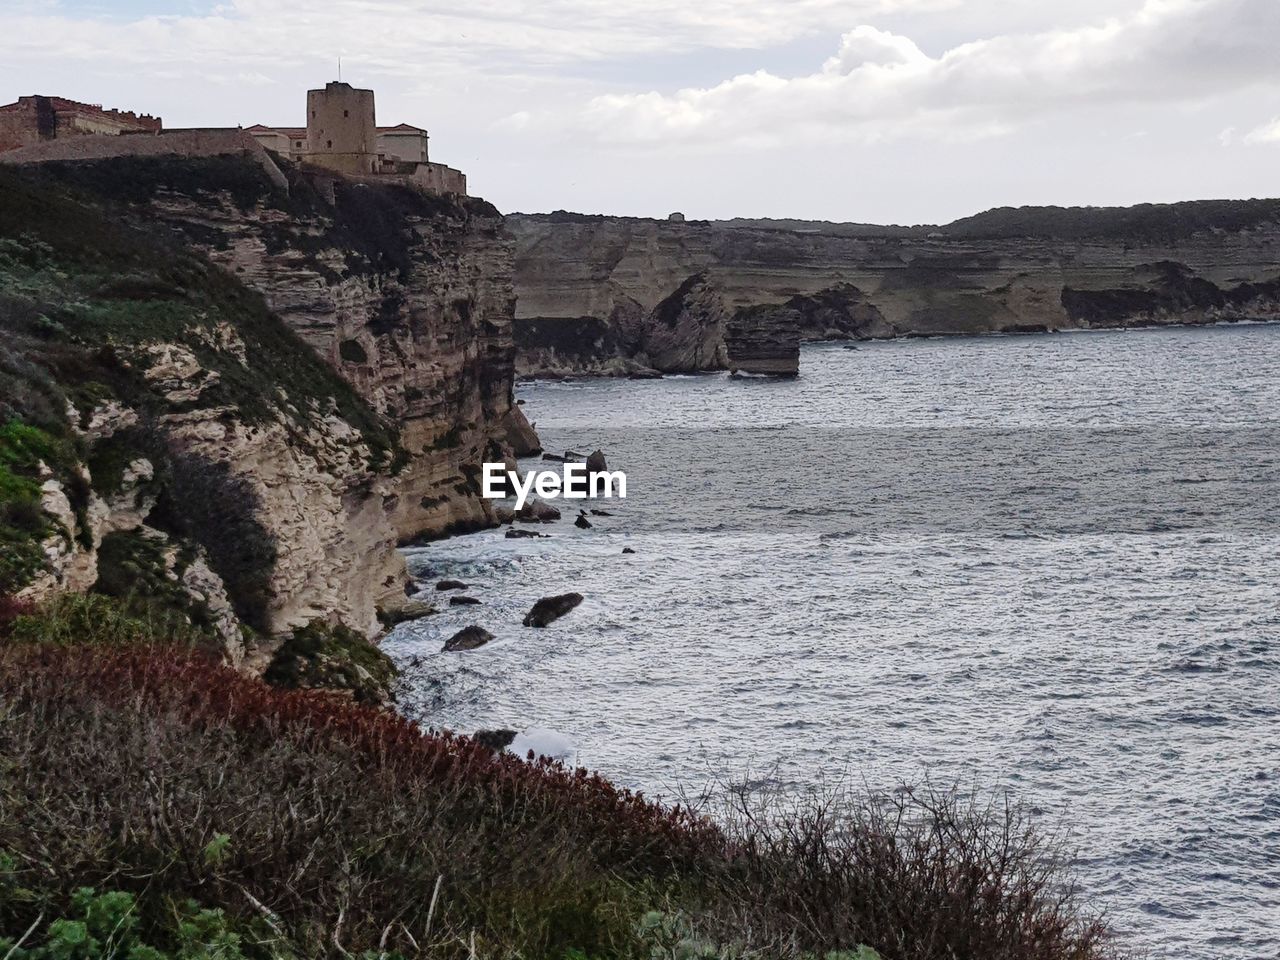 VIEW OF CLIFF BY SEA AGAINST SKY